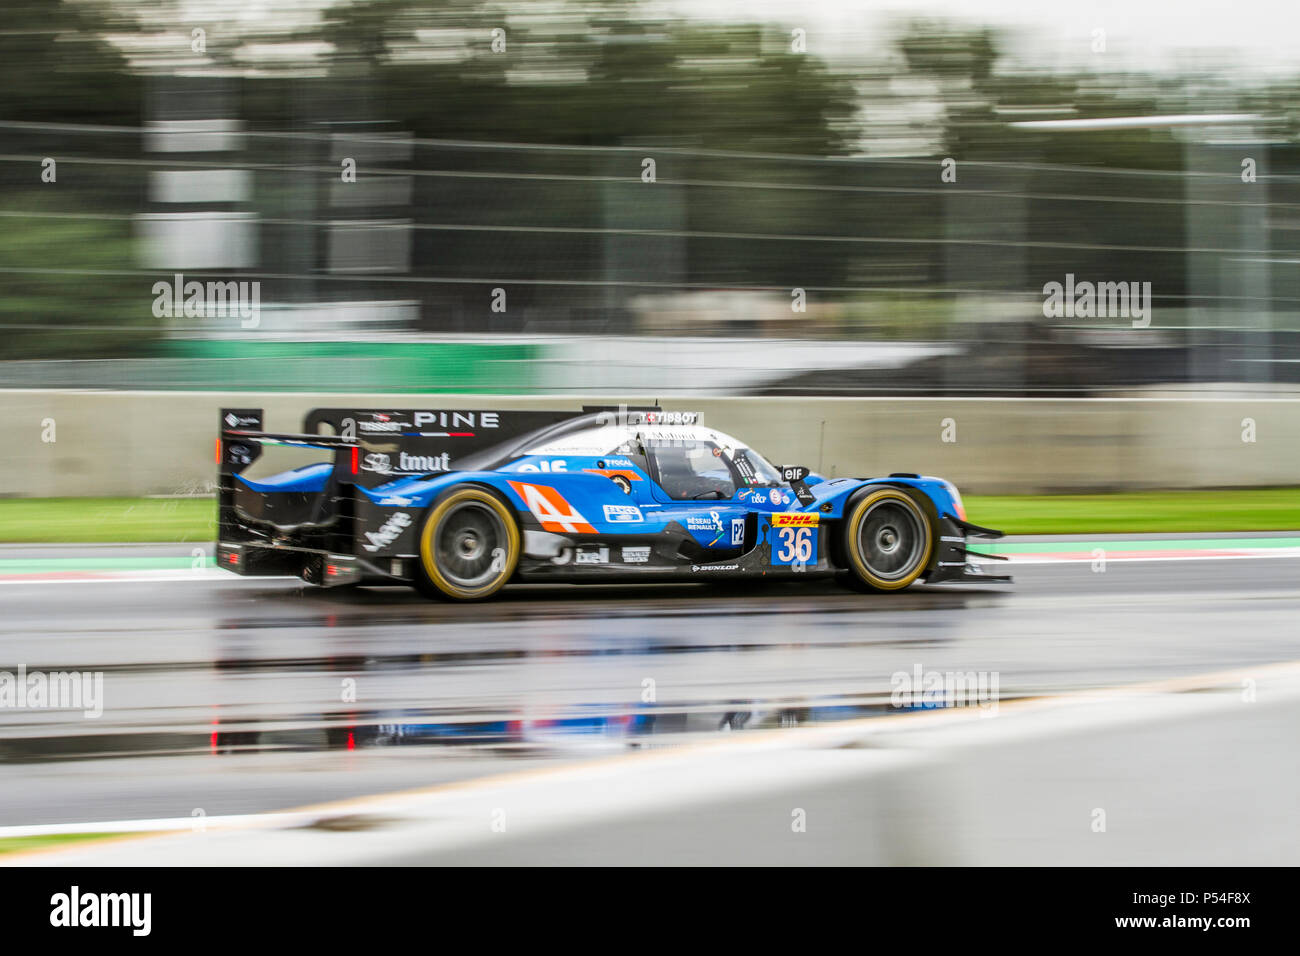 Mexico City, Mexico – September 01, 2017: Autodromo Hermanos Rodriguez. 6hrs of Mexico, FIA WEC. SIGNATECH ALPINE MAMUT driver´s Nicolas Lapierre, Gustavo Menezes or Andre Negrao, at the Alpine A470 Gibson No. 36, running at the Free Practice I. Stock Photo